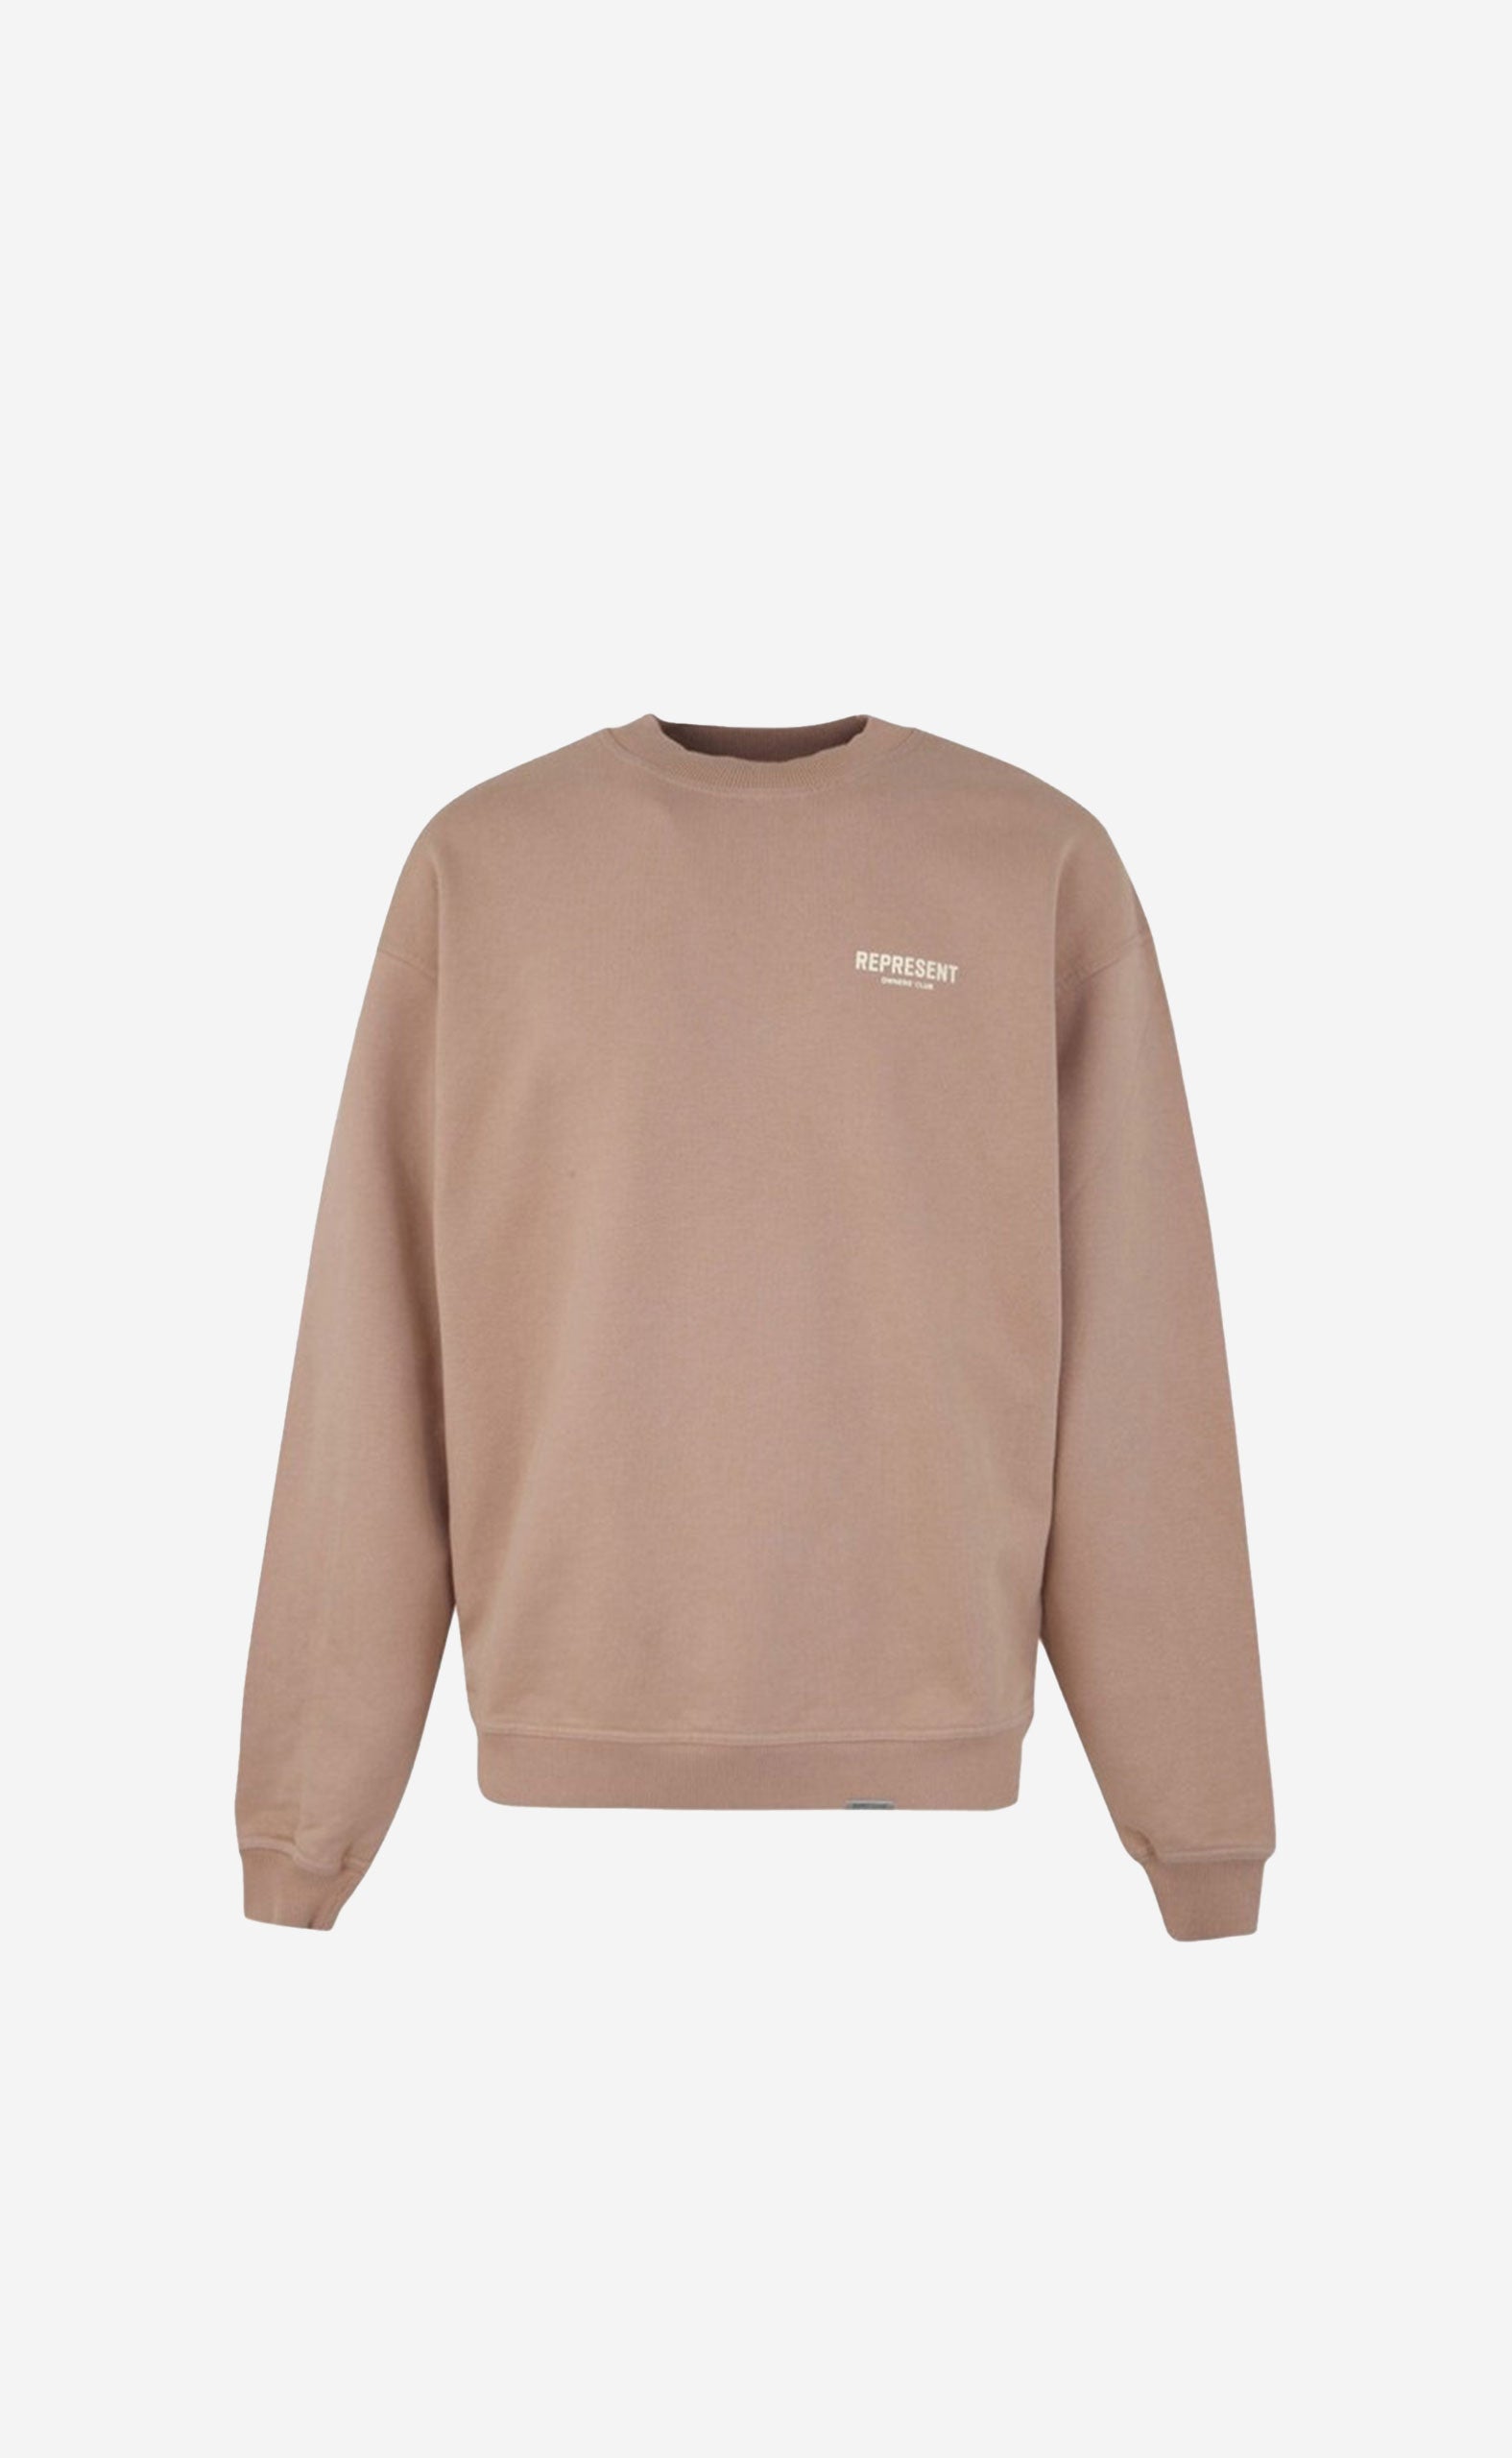 STUCCO OWNERS CLUB SWEATER